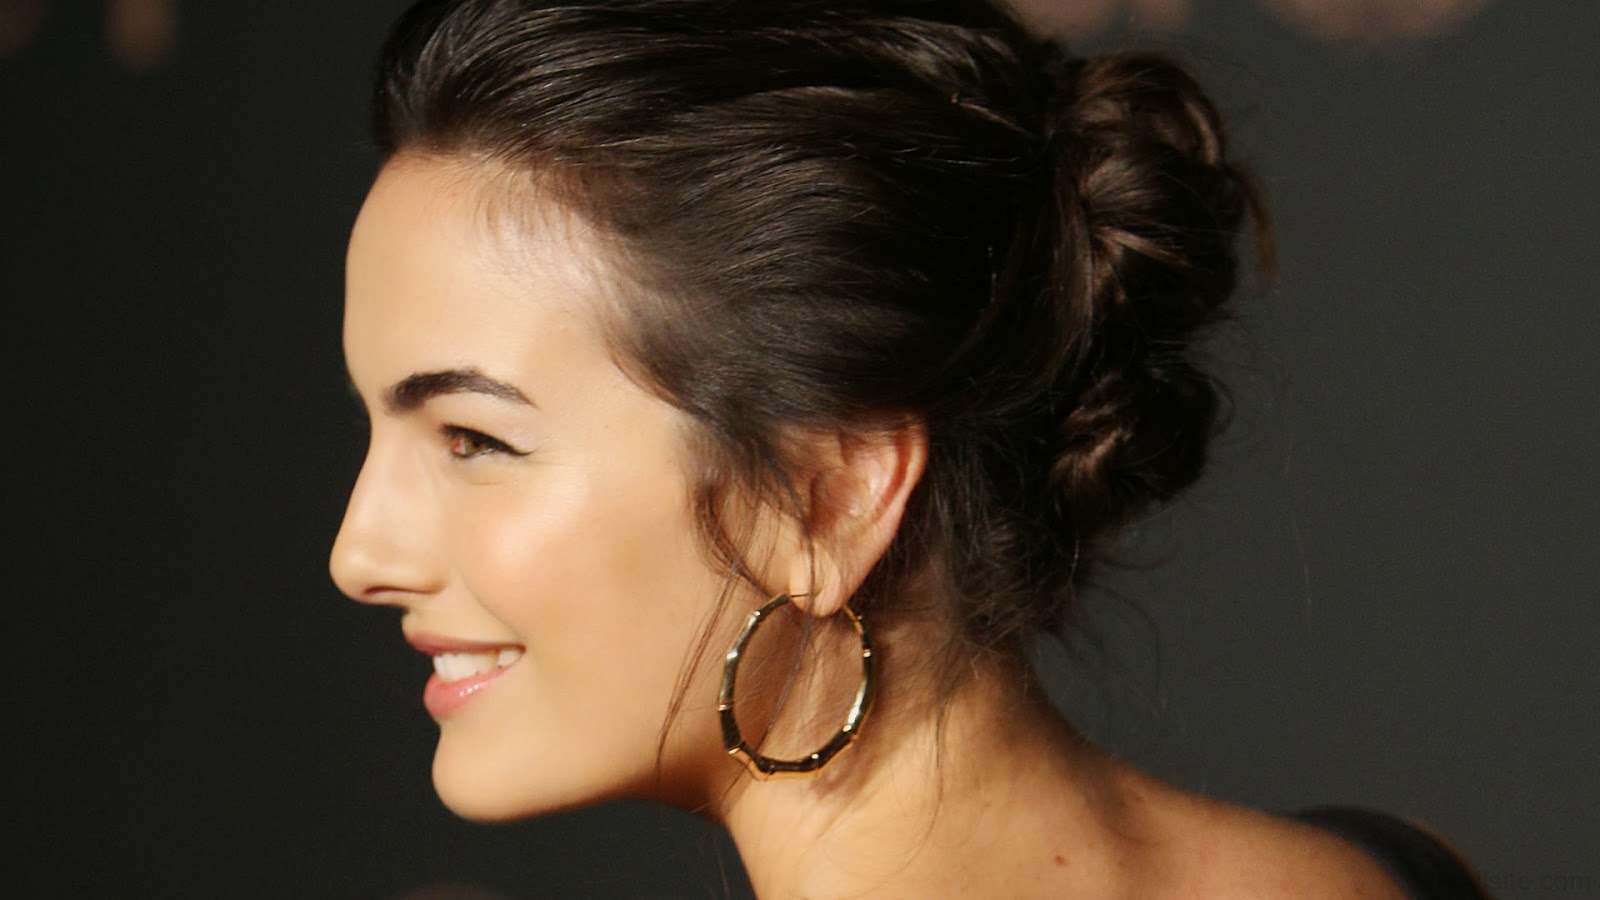 Download Free HD Wallpapers: HD Wallpapers of Camilla Belle